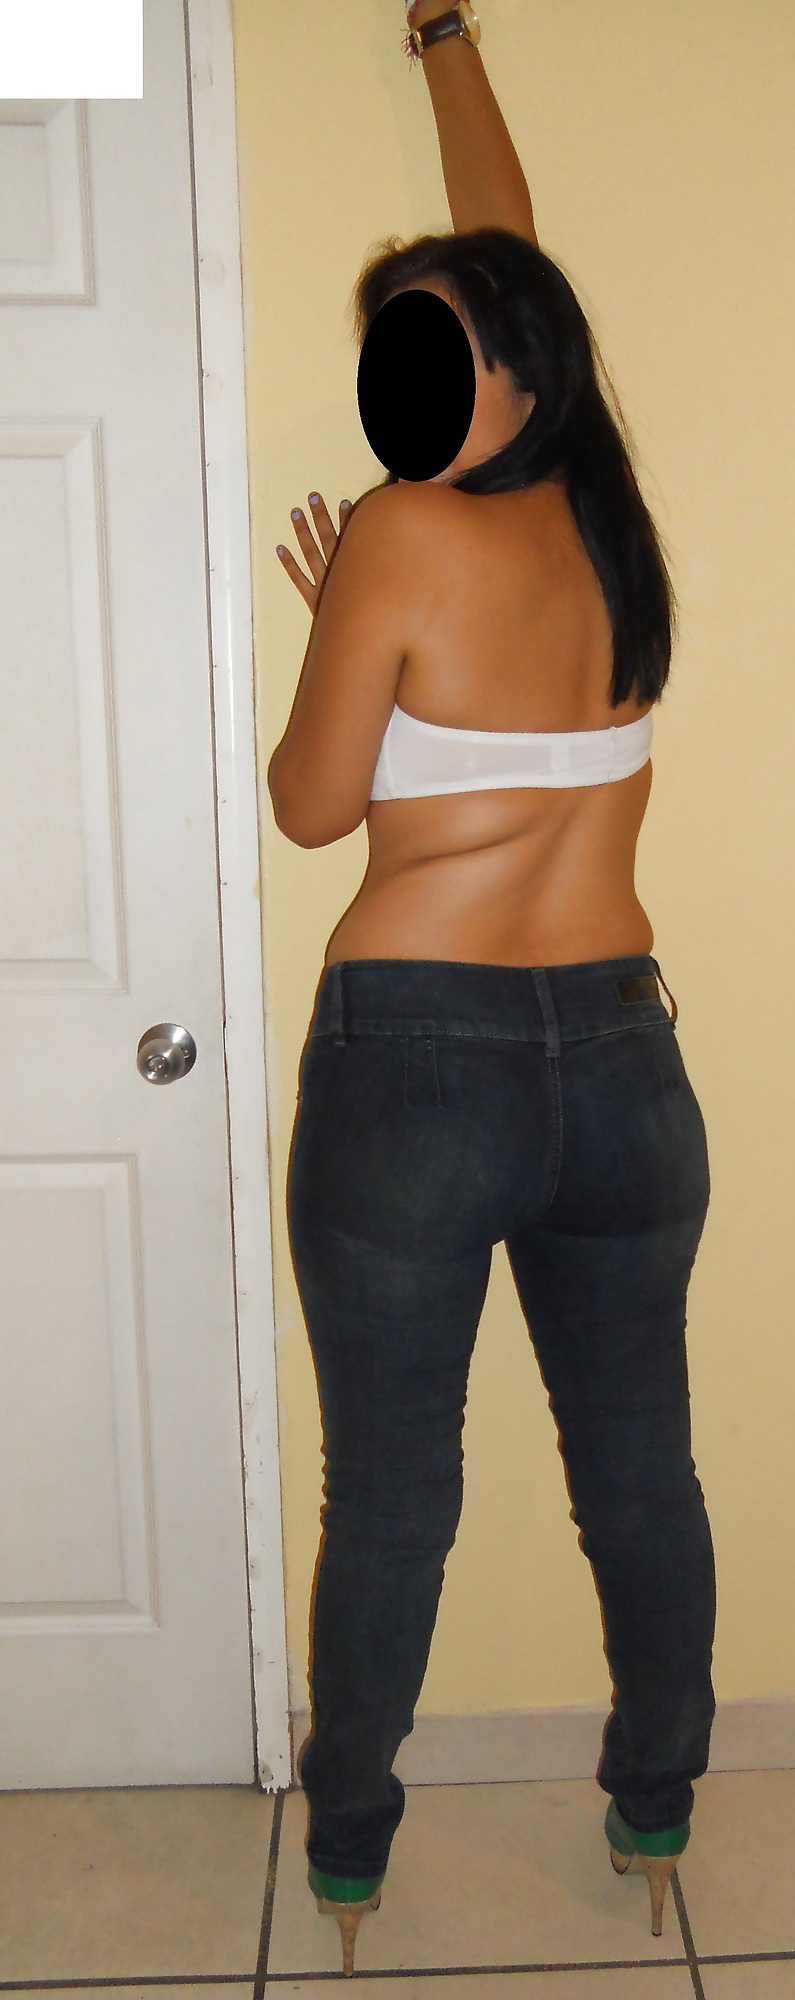 Sexy latina in jeans and teal panty #22755196